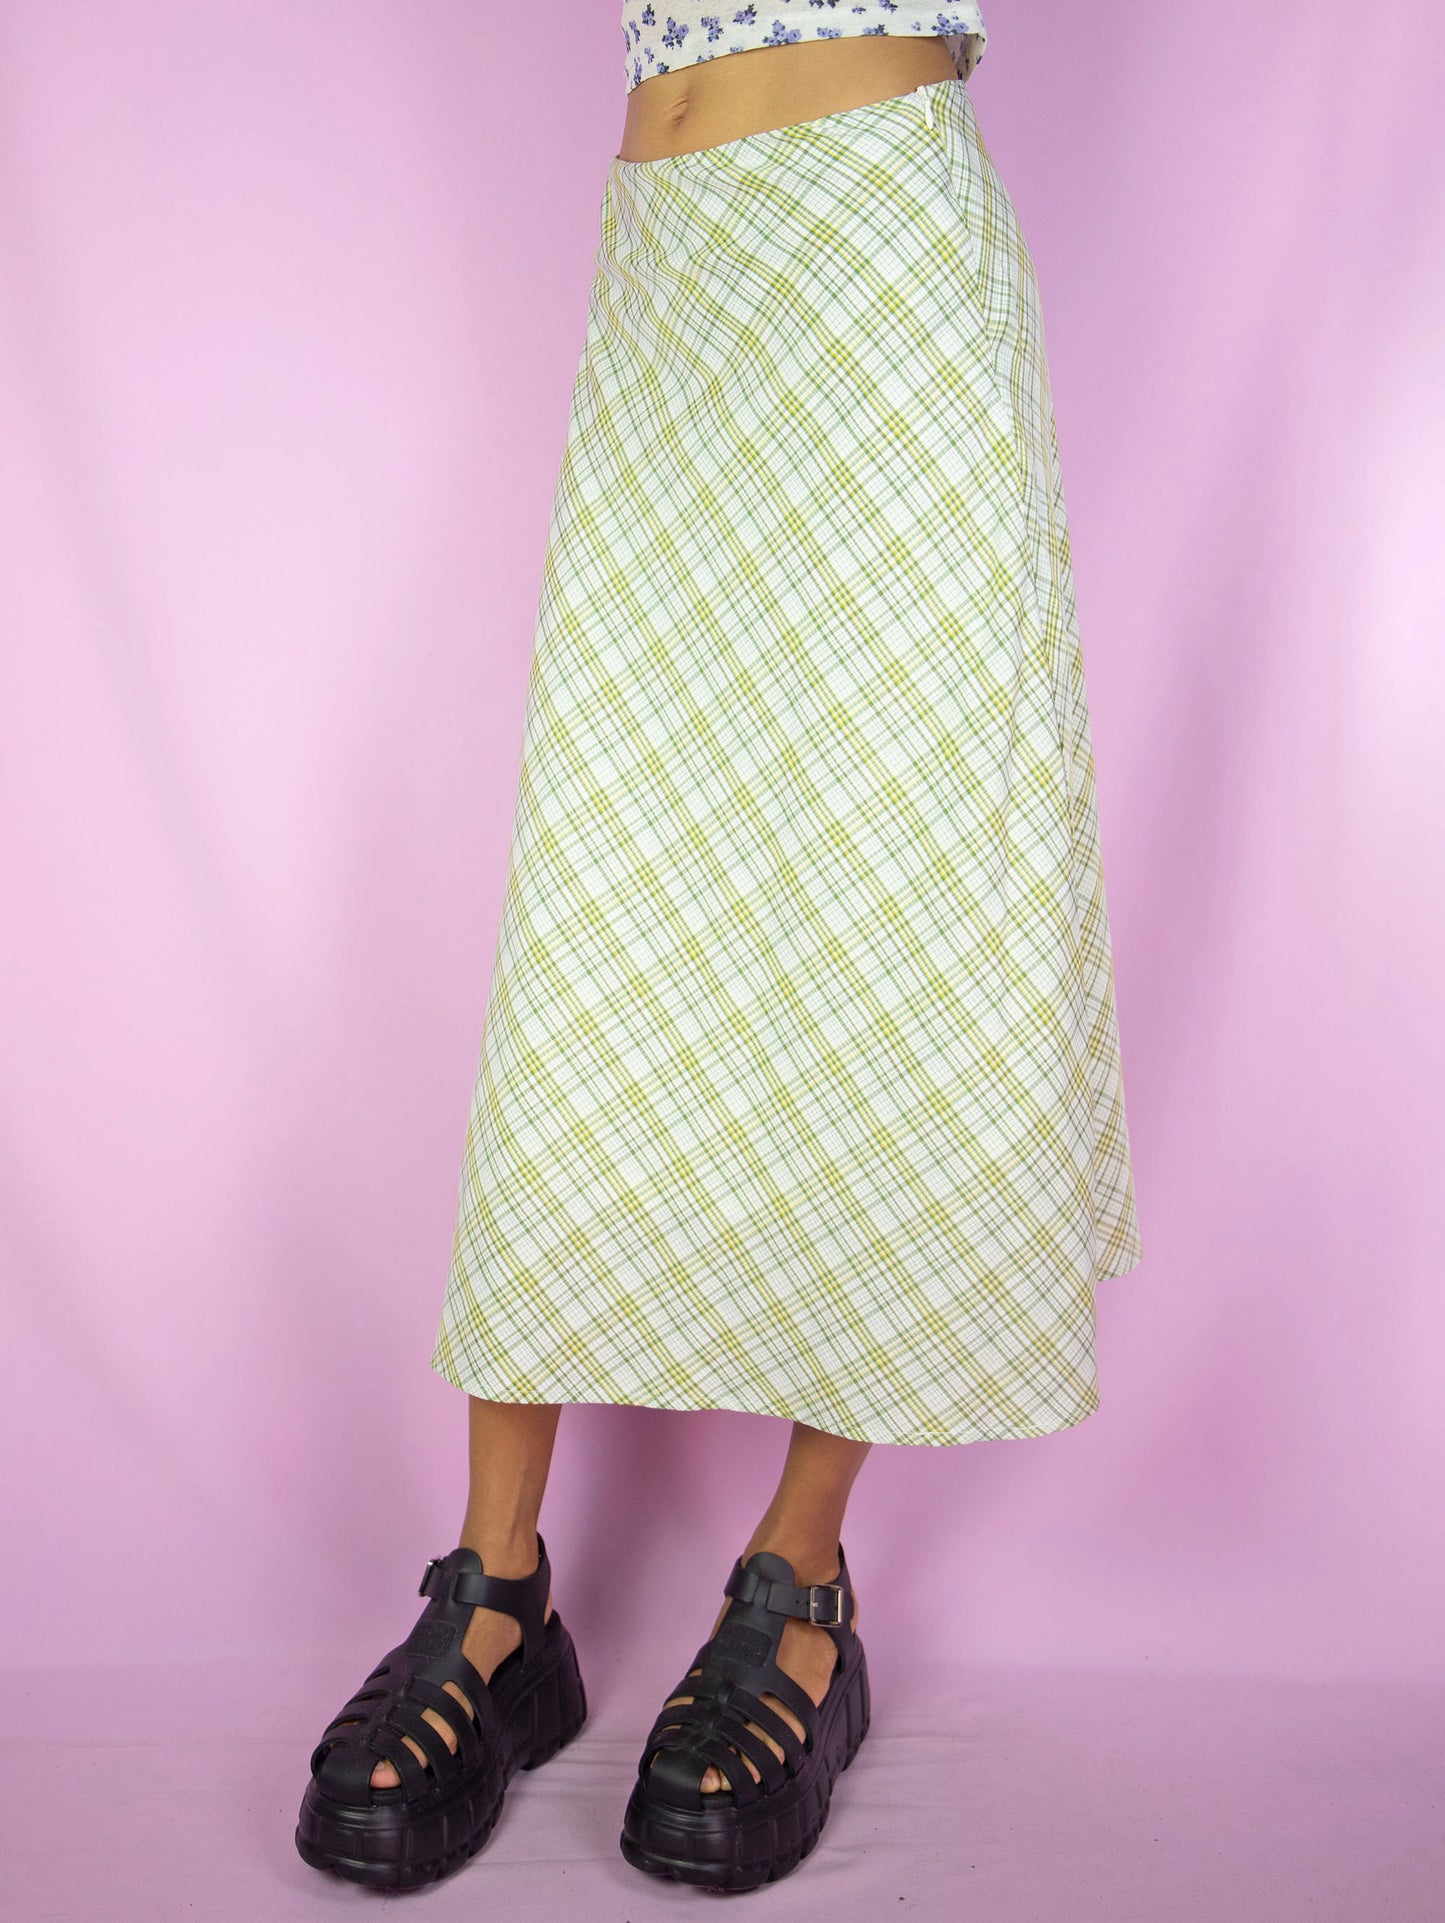 The Y2K Green Plaid Midi Skirt is a vintage flared beige yellow green plaid skirt with side zipper closure. Cottage prairie inspired 2000s boho preppy check maxi skirt.